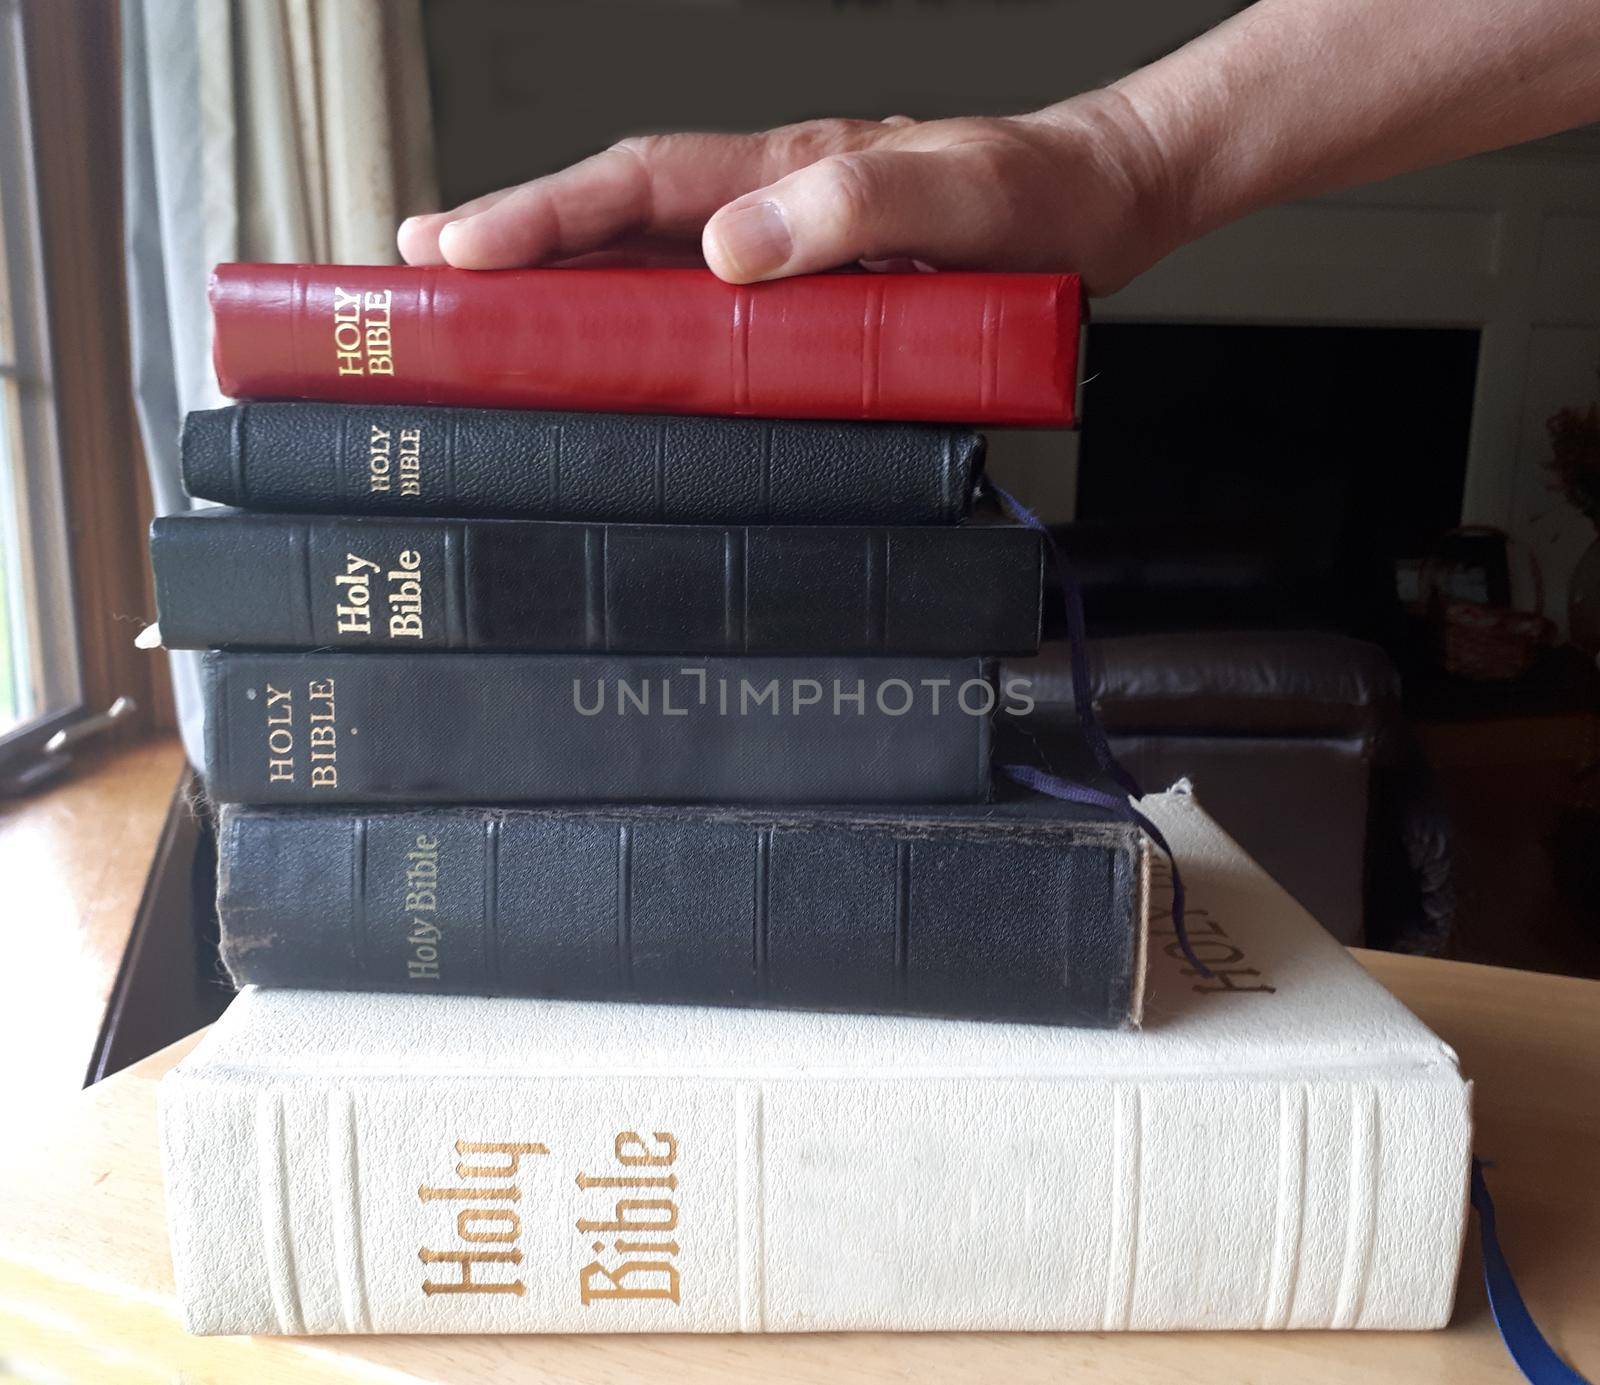 A hand on top of a stack of bibles is ready to swear the truth 